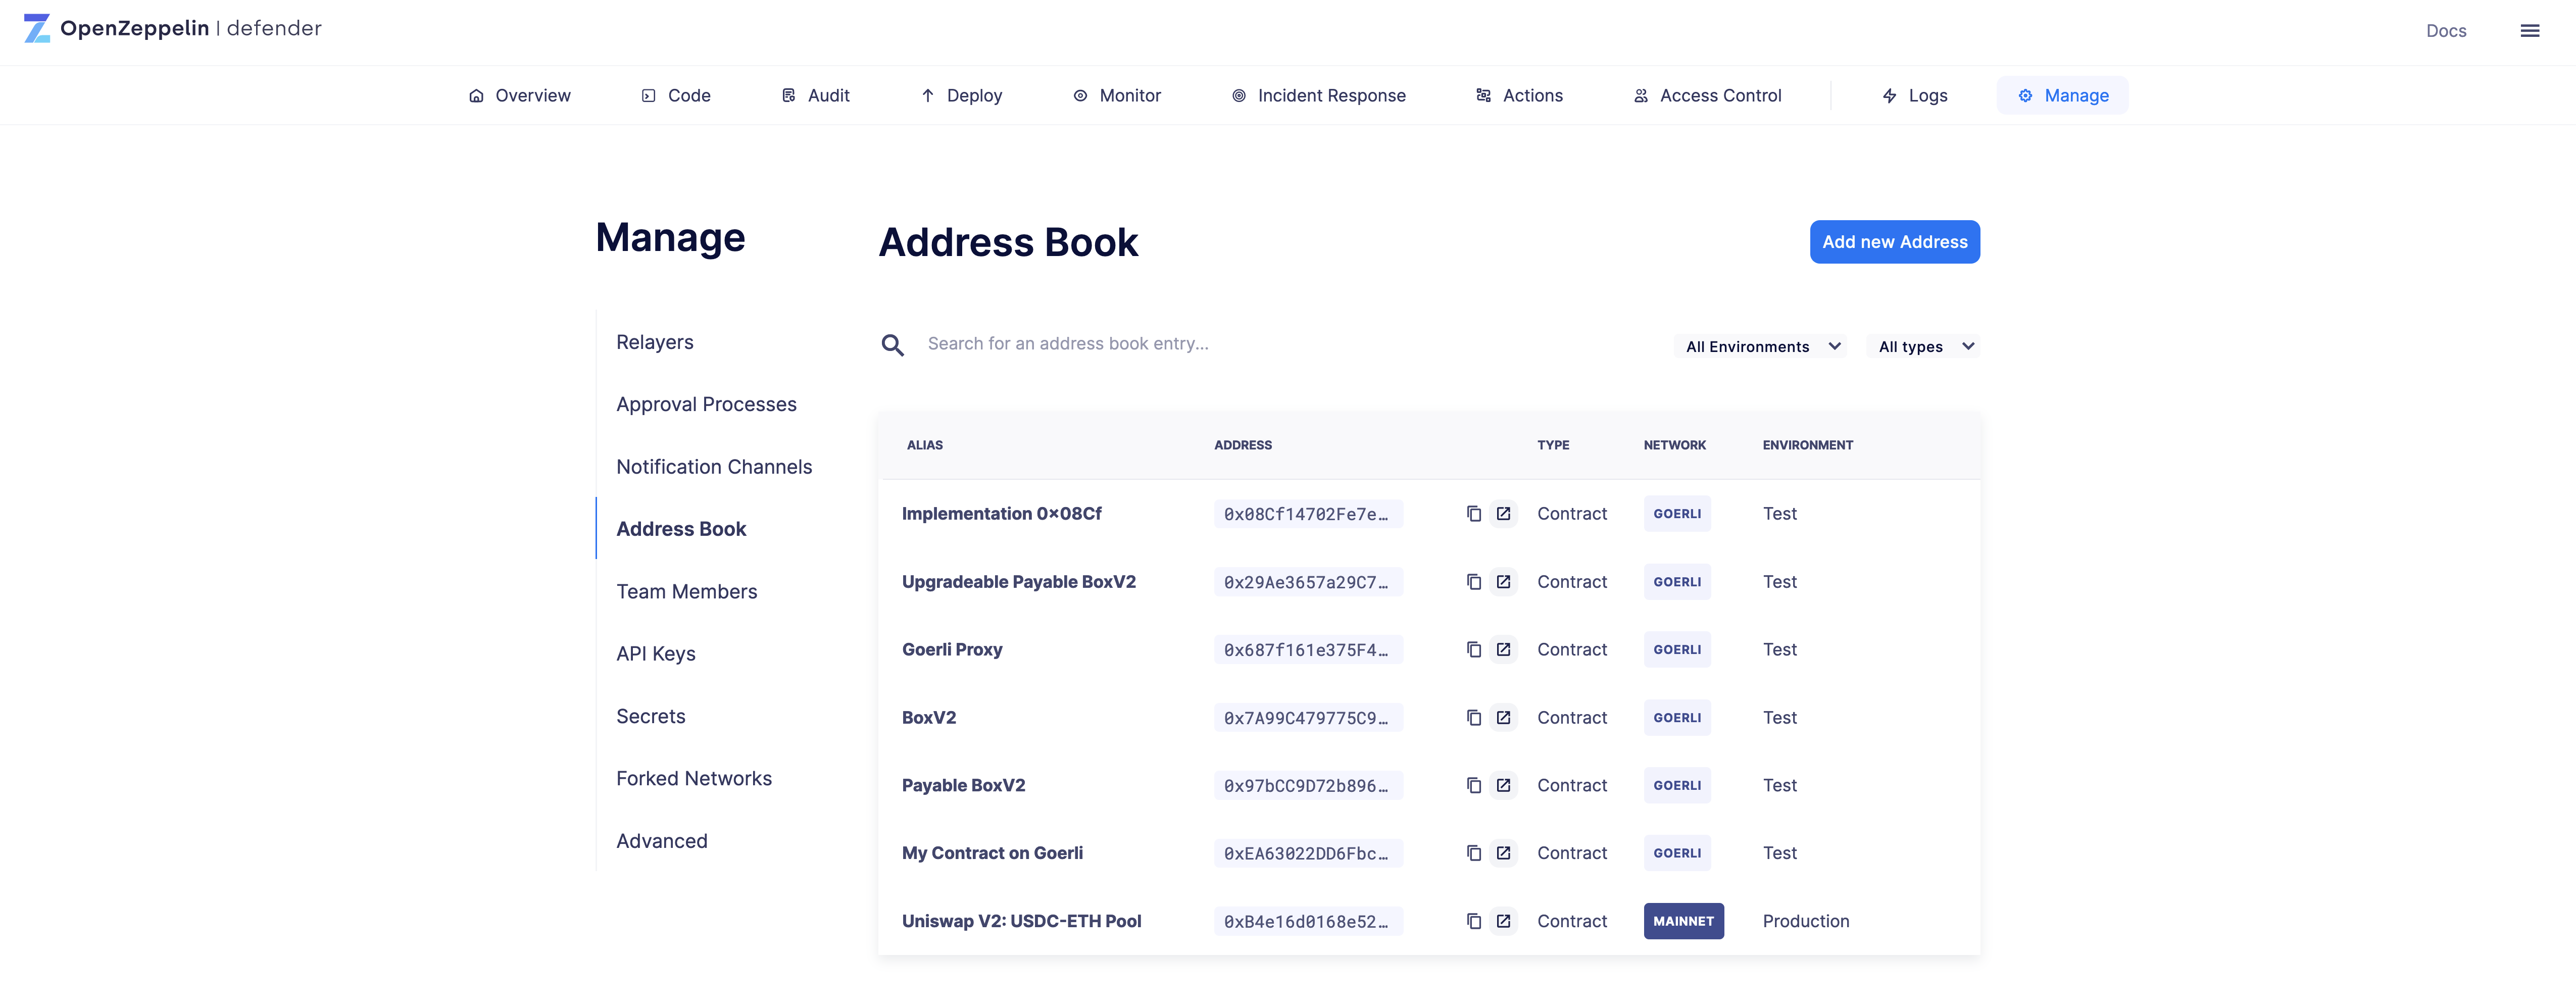 Address Book - located under the Manage section used to manage contracts